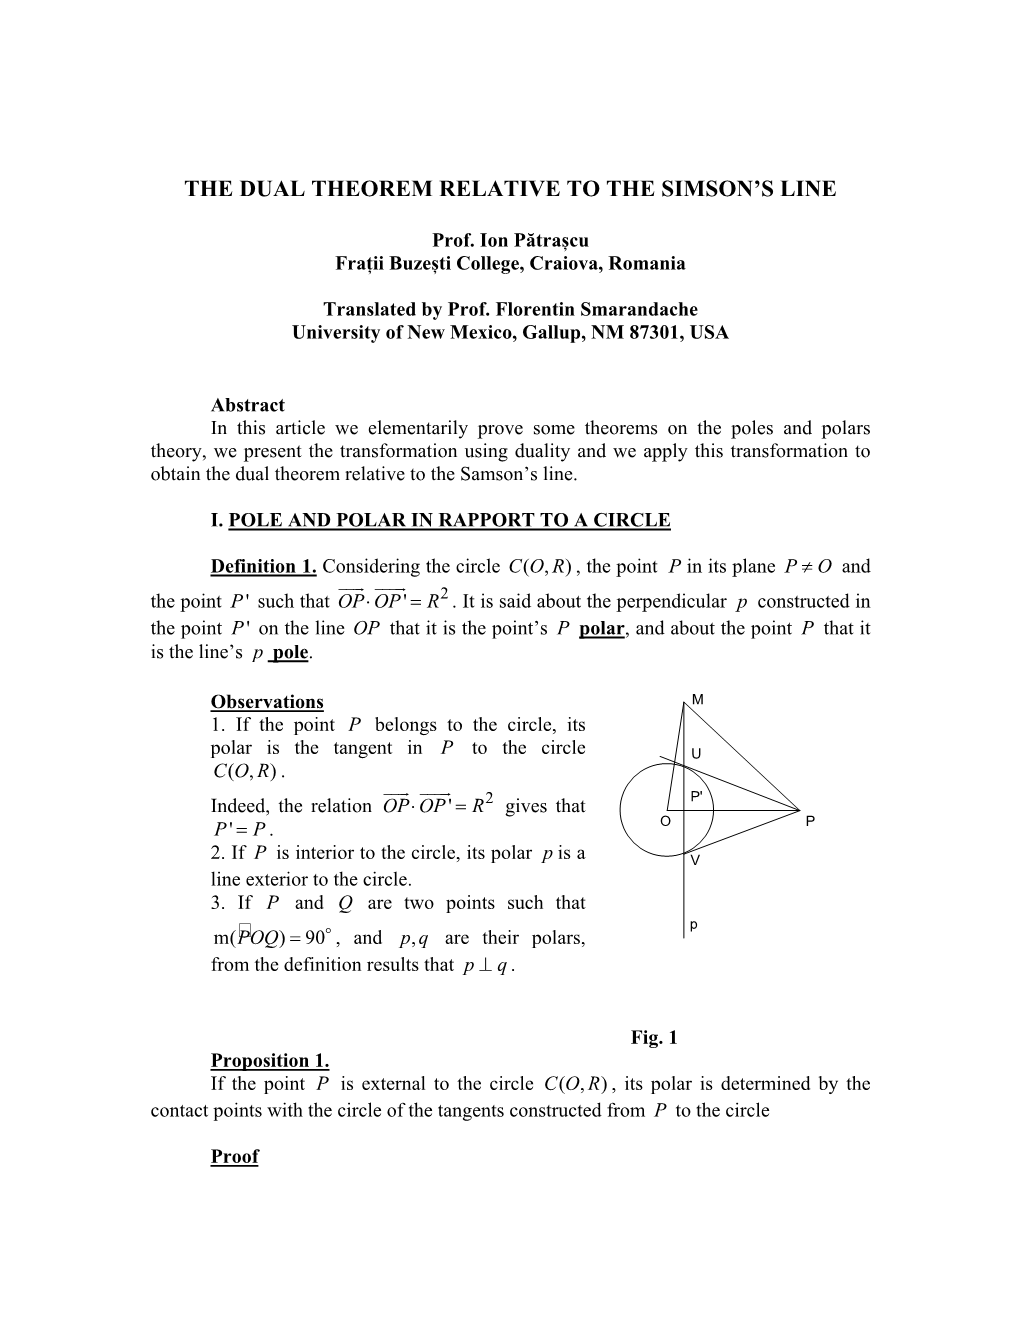 The Dual Theorem Relative to the Simson's Line